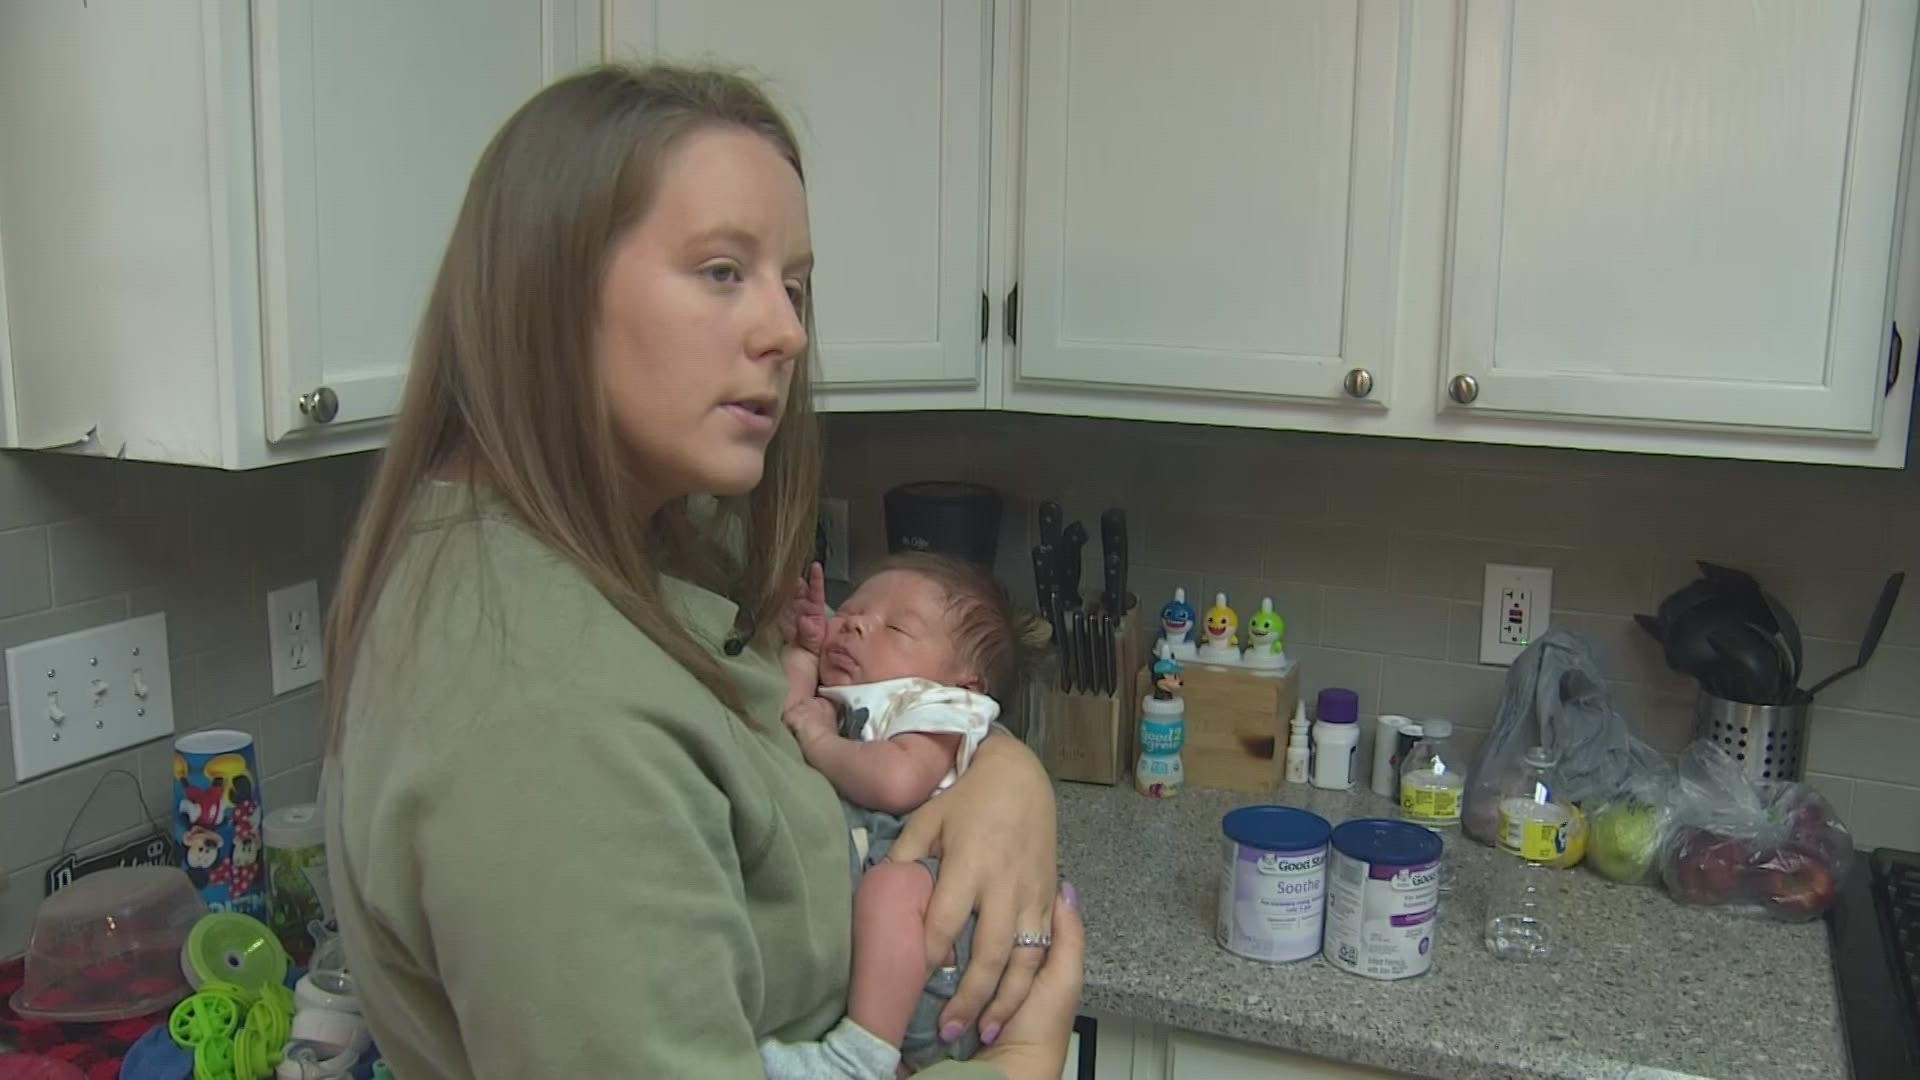 Morgan Heid welcomed her fourth child, Gunner, just three weeks ago and she's worried she may not be able to feed him with the shortage in baby formula.